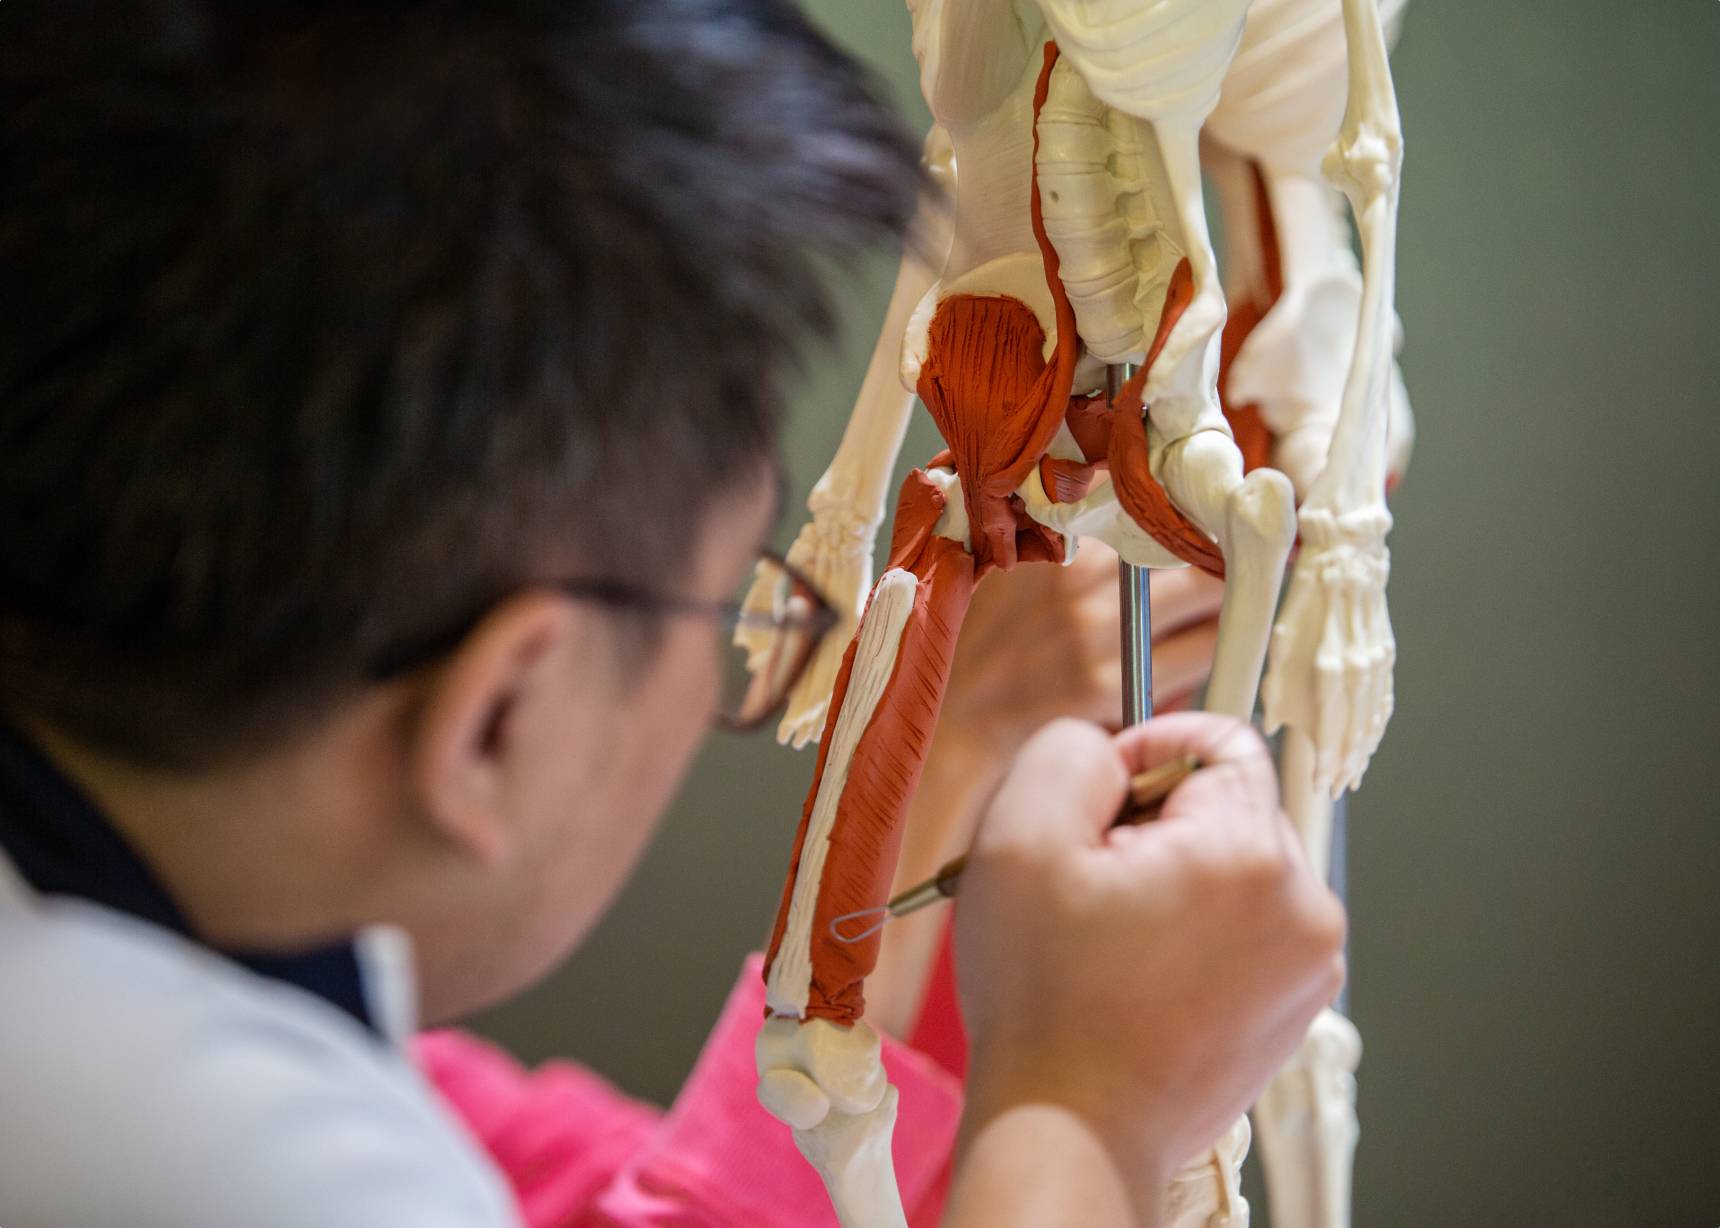 Man analyzing an anatomical skeleton as part of a complete build kit.